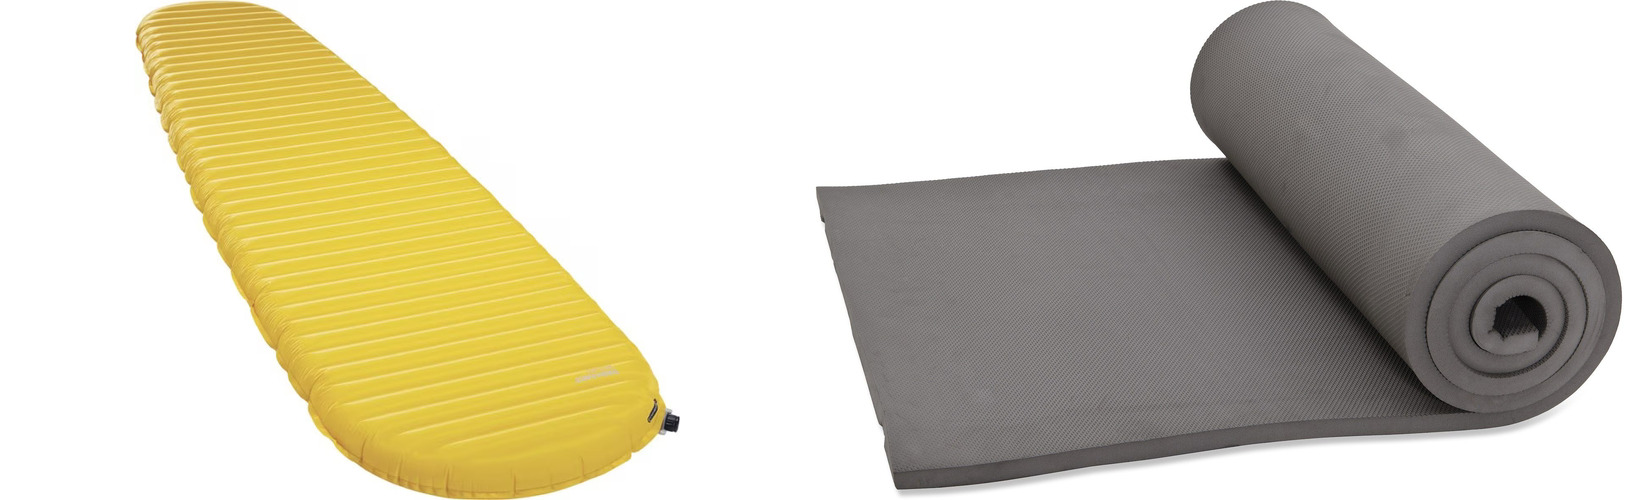 inflatable pad / closed-cell pad